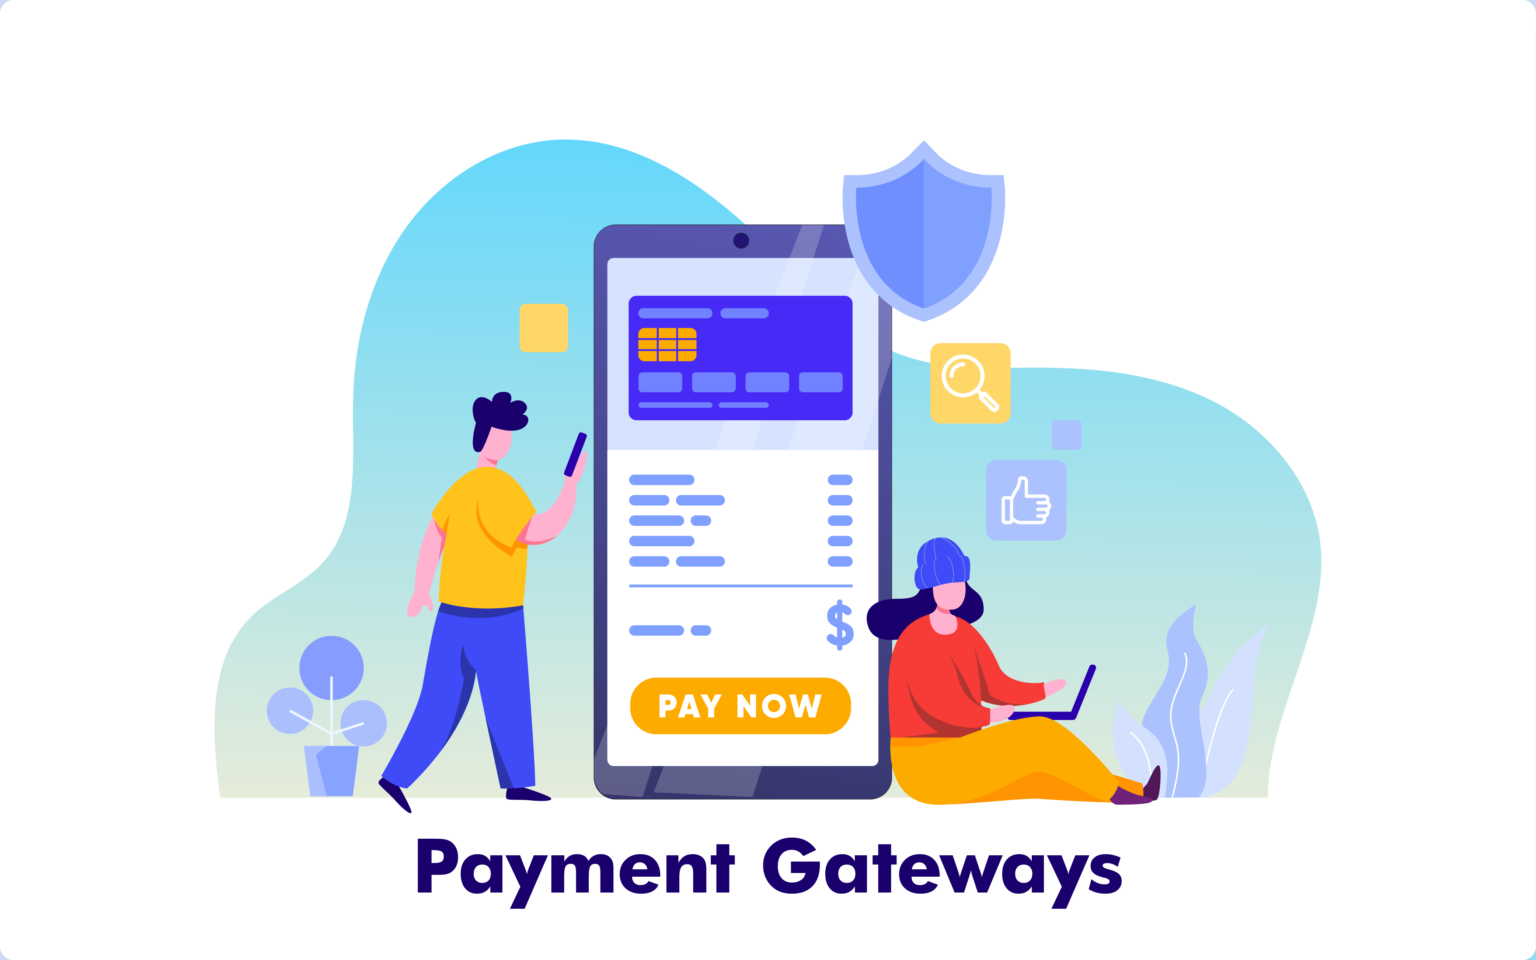 How To Add Payment Gateways